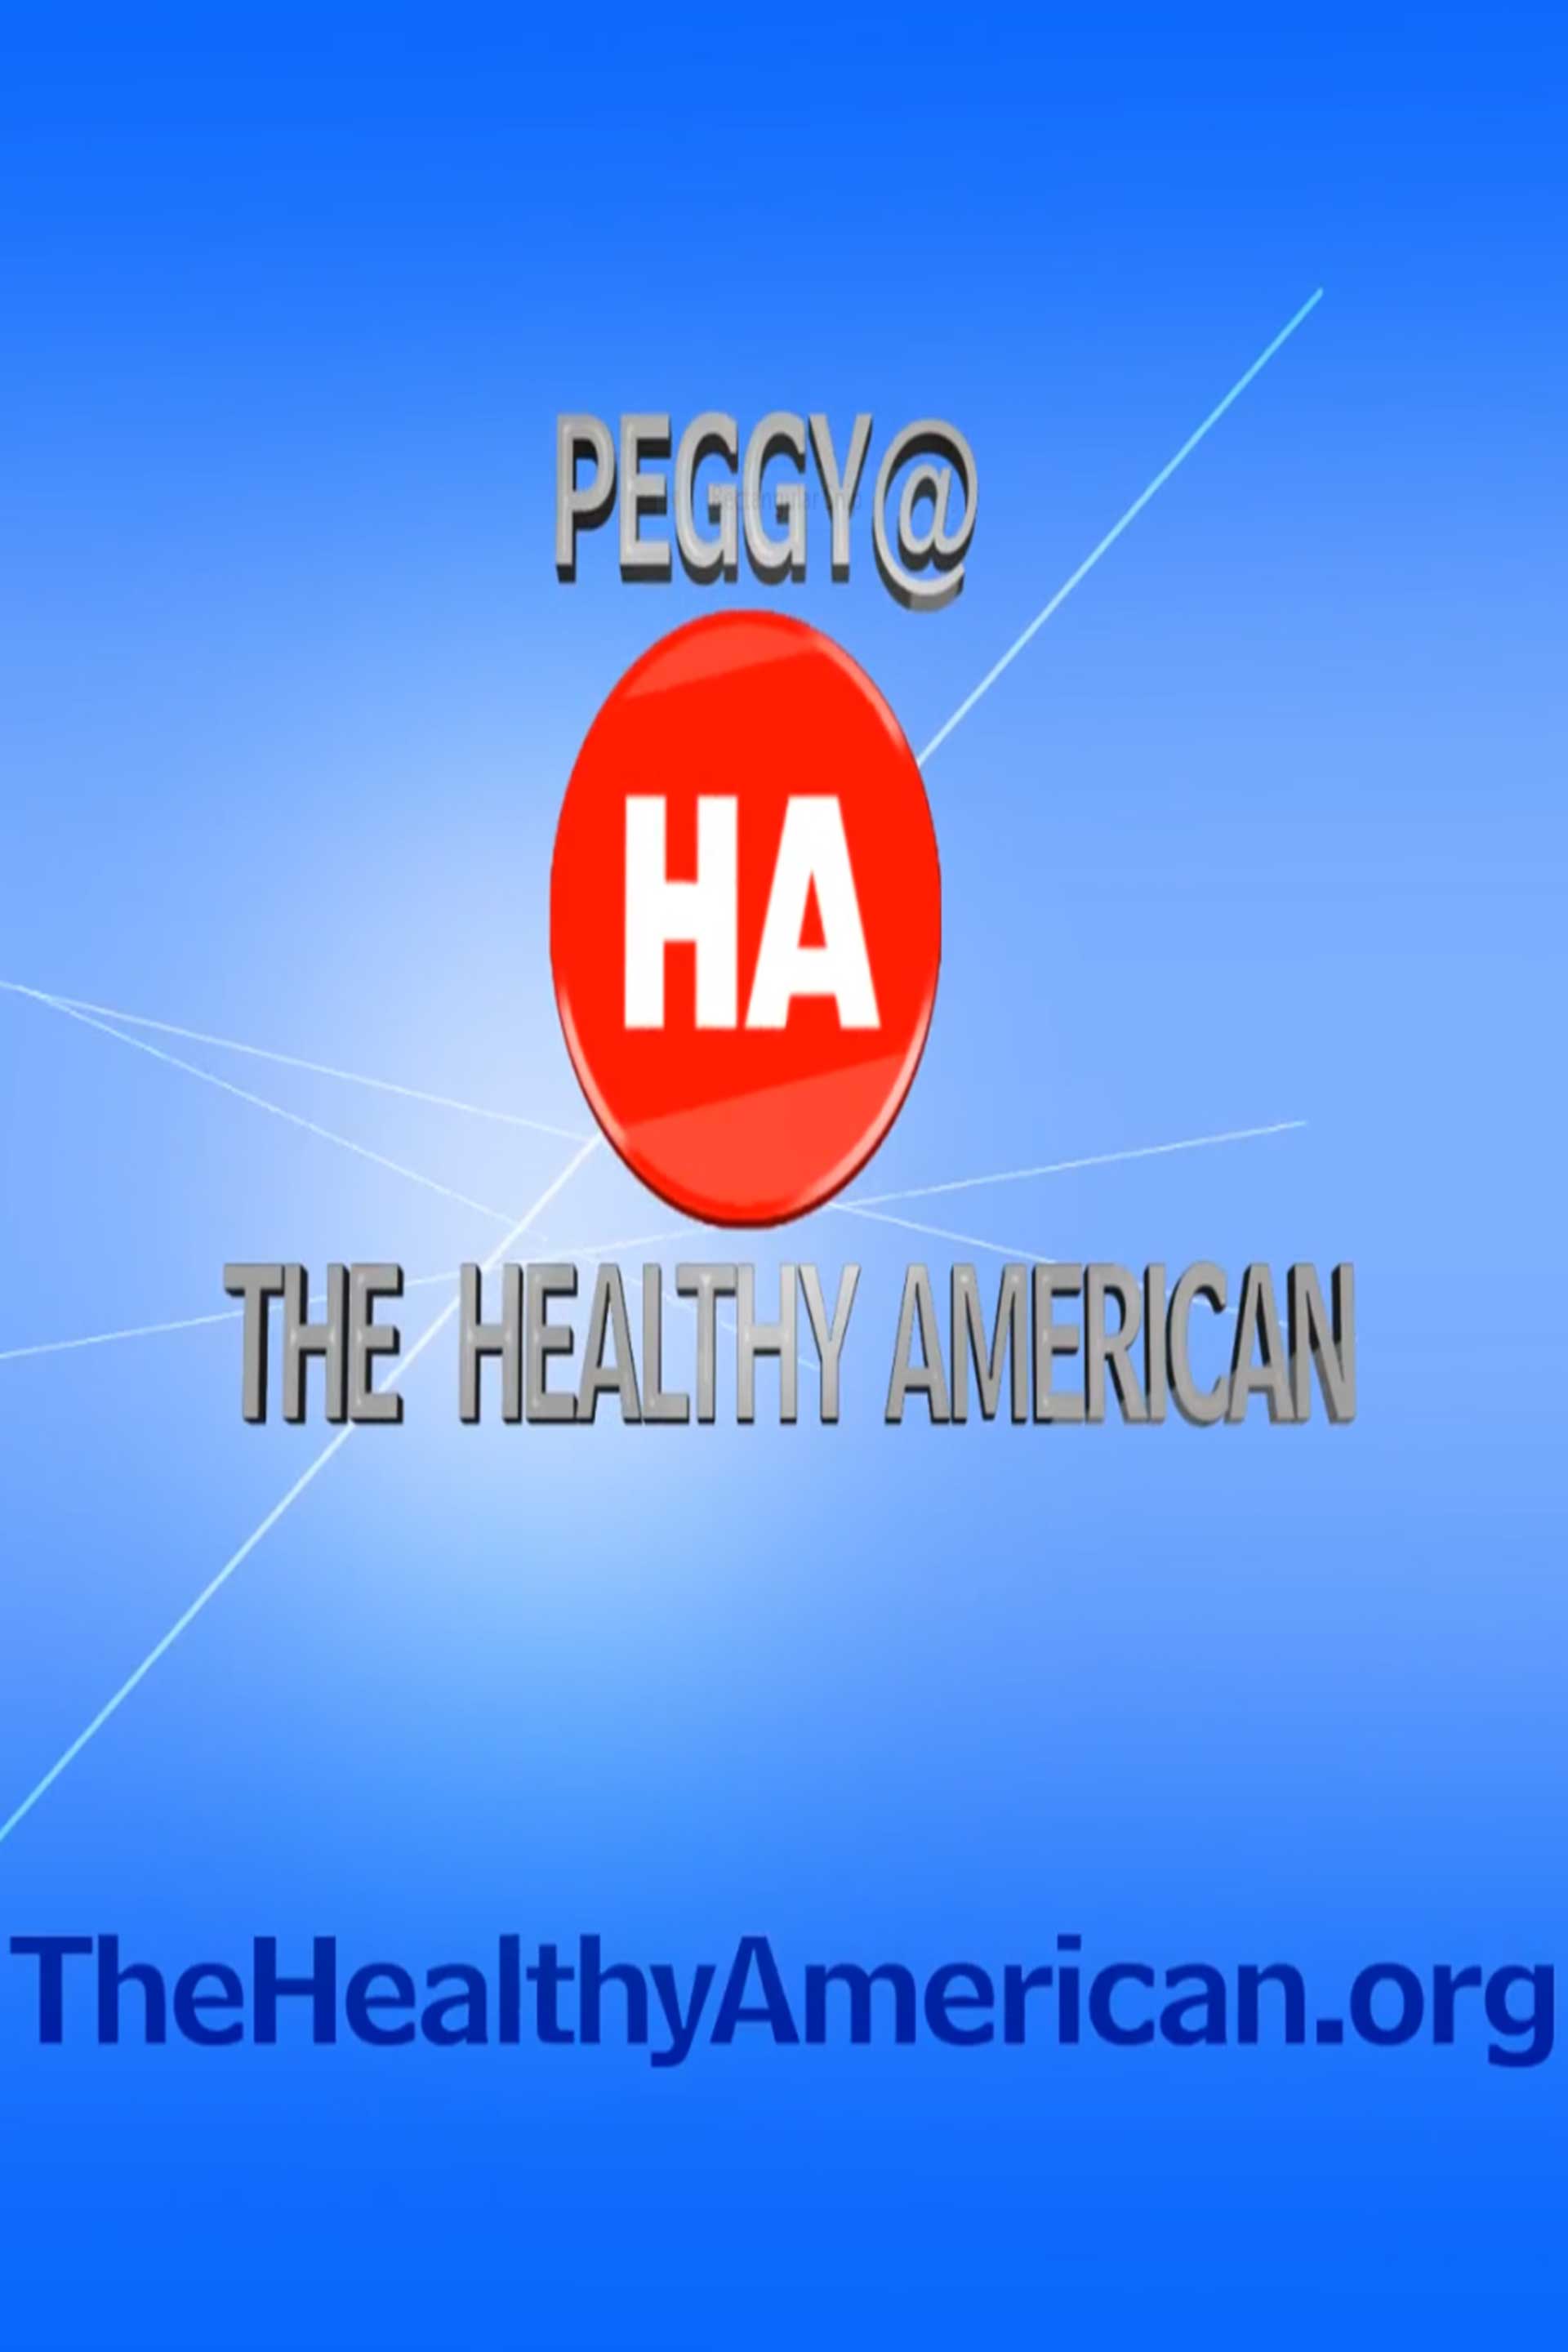 Fan related Youtube channel Intro for The healthy American by Peggy Hall by Raquelia Leone